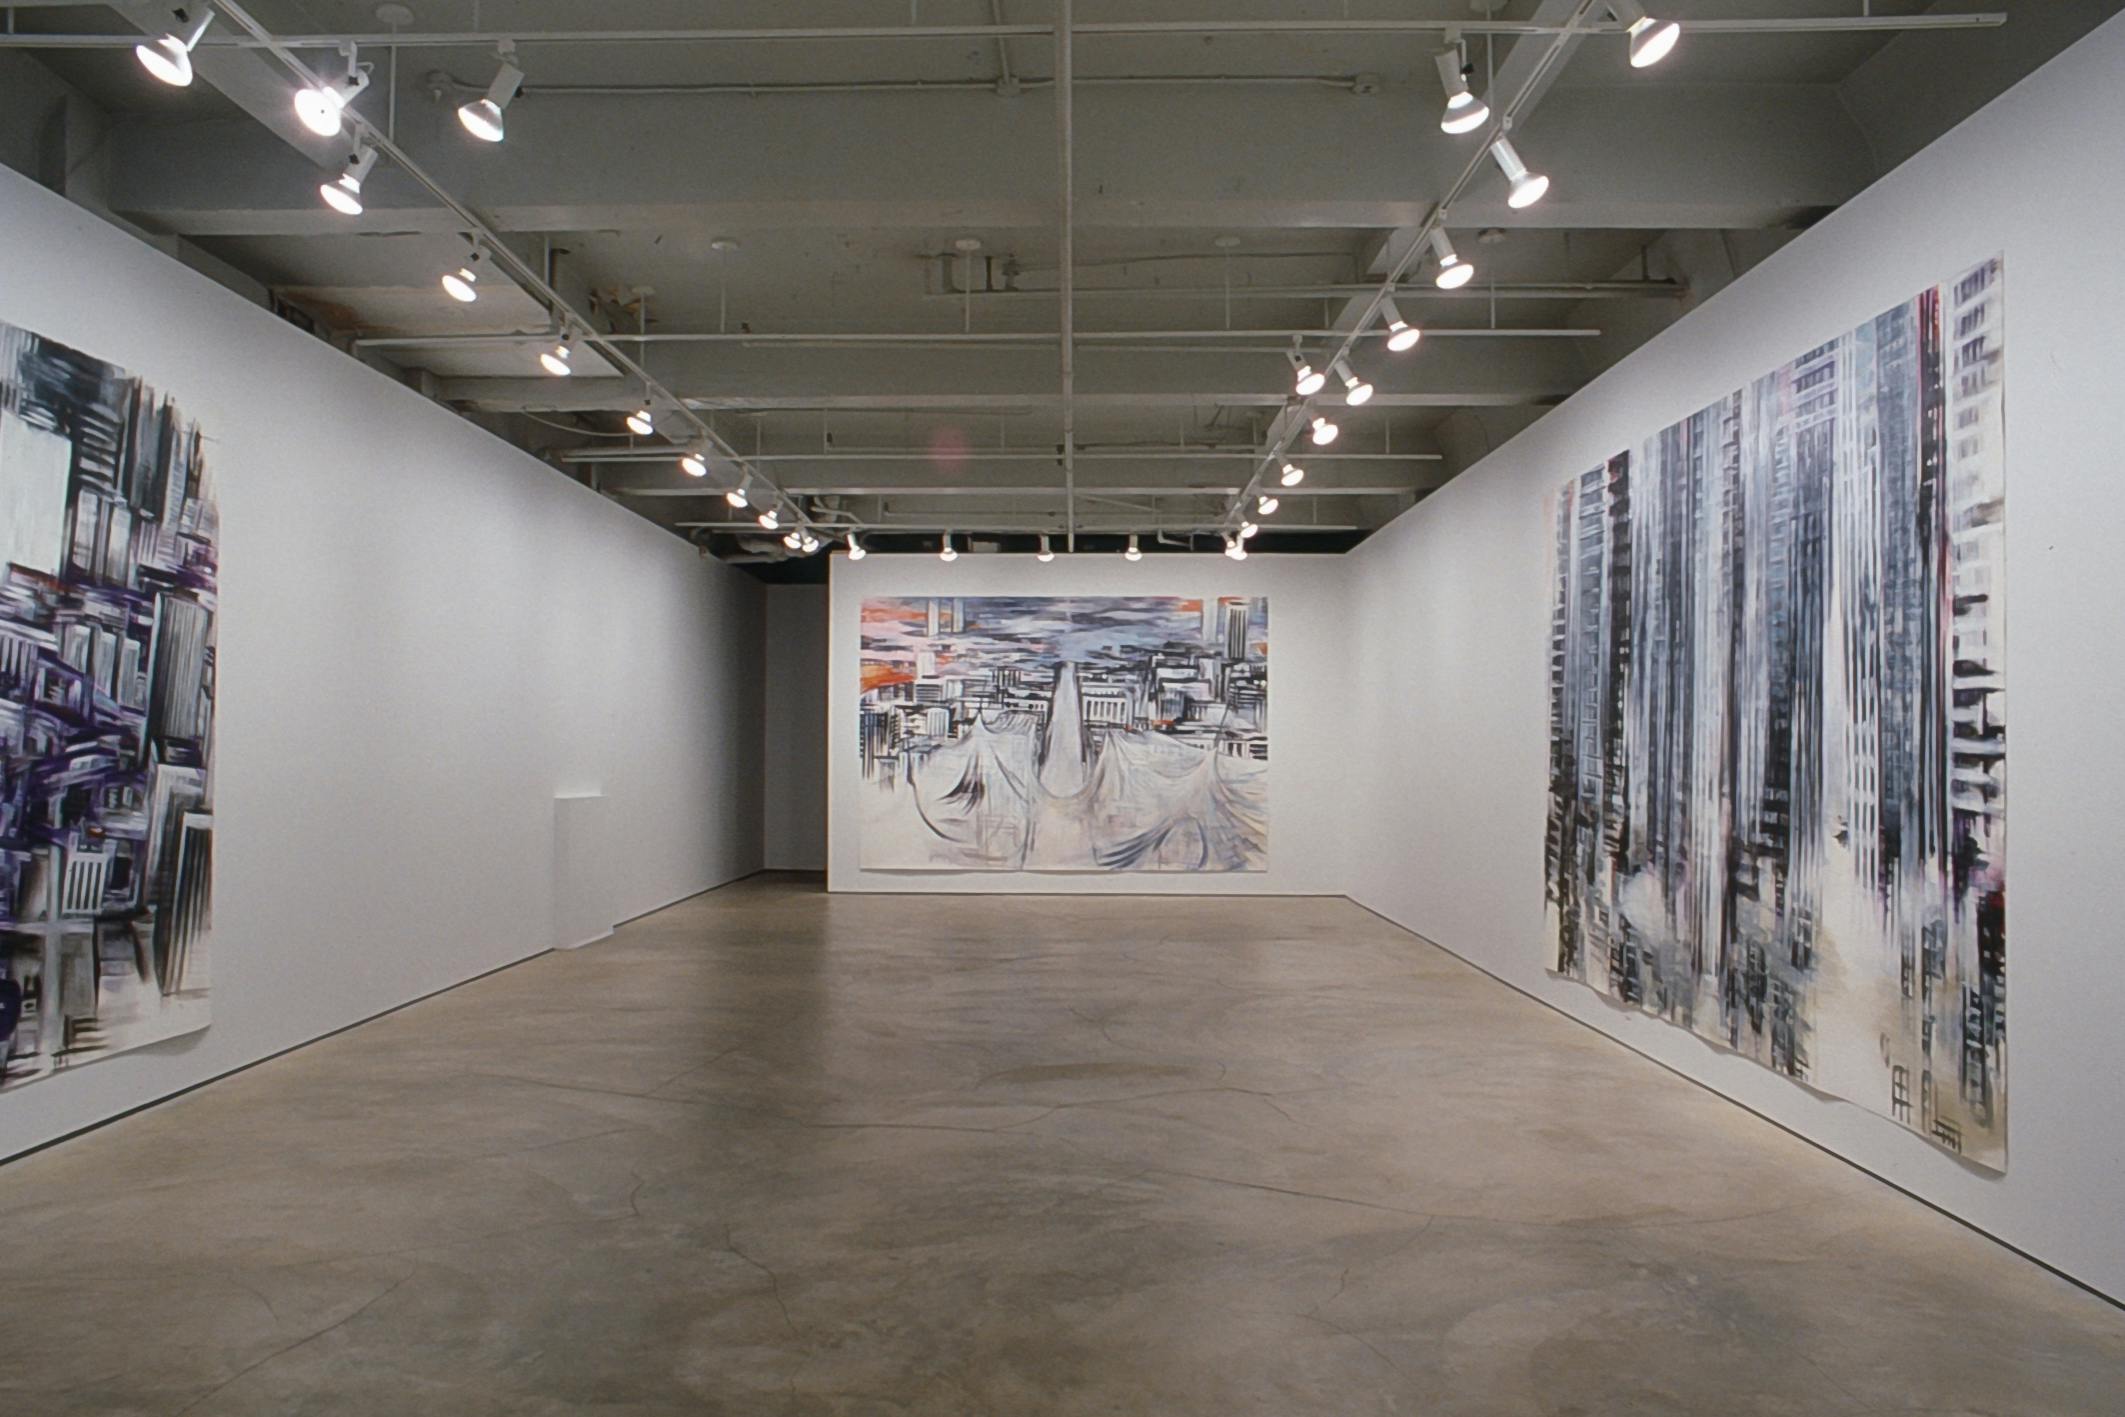 Large-scale paintings are installed on the gallery walls. They depict urban city landscapes in grey, purple, and orange colours. Many vertical lines are used to depict towers, streets and buildings.